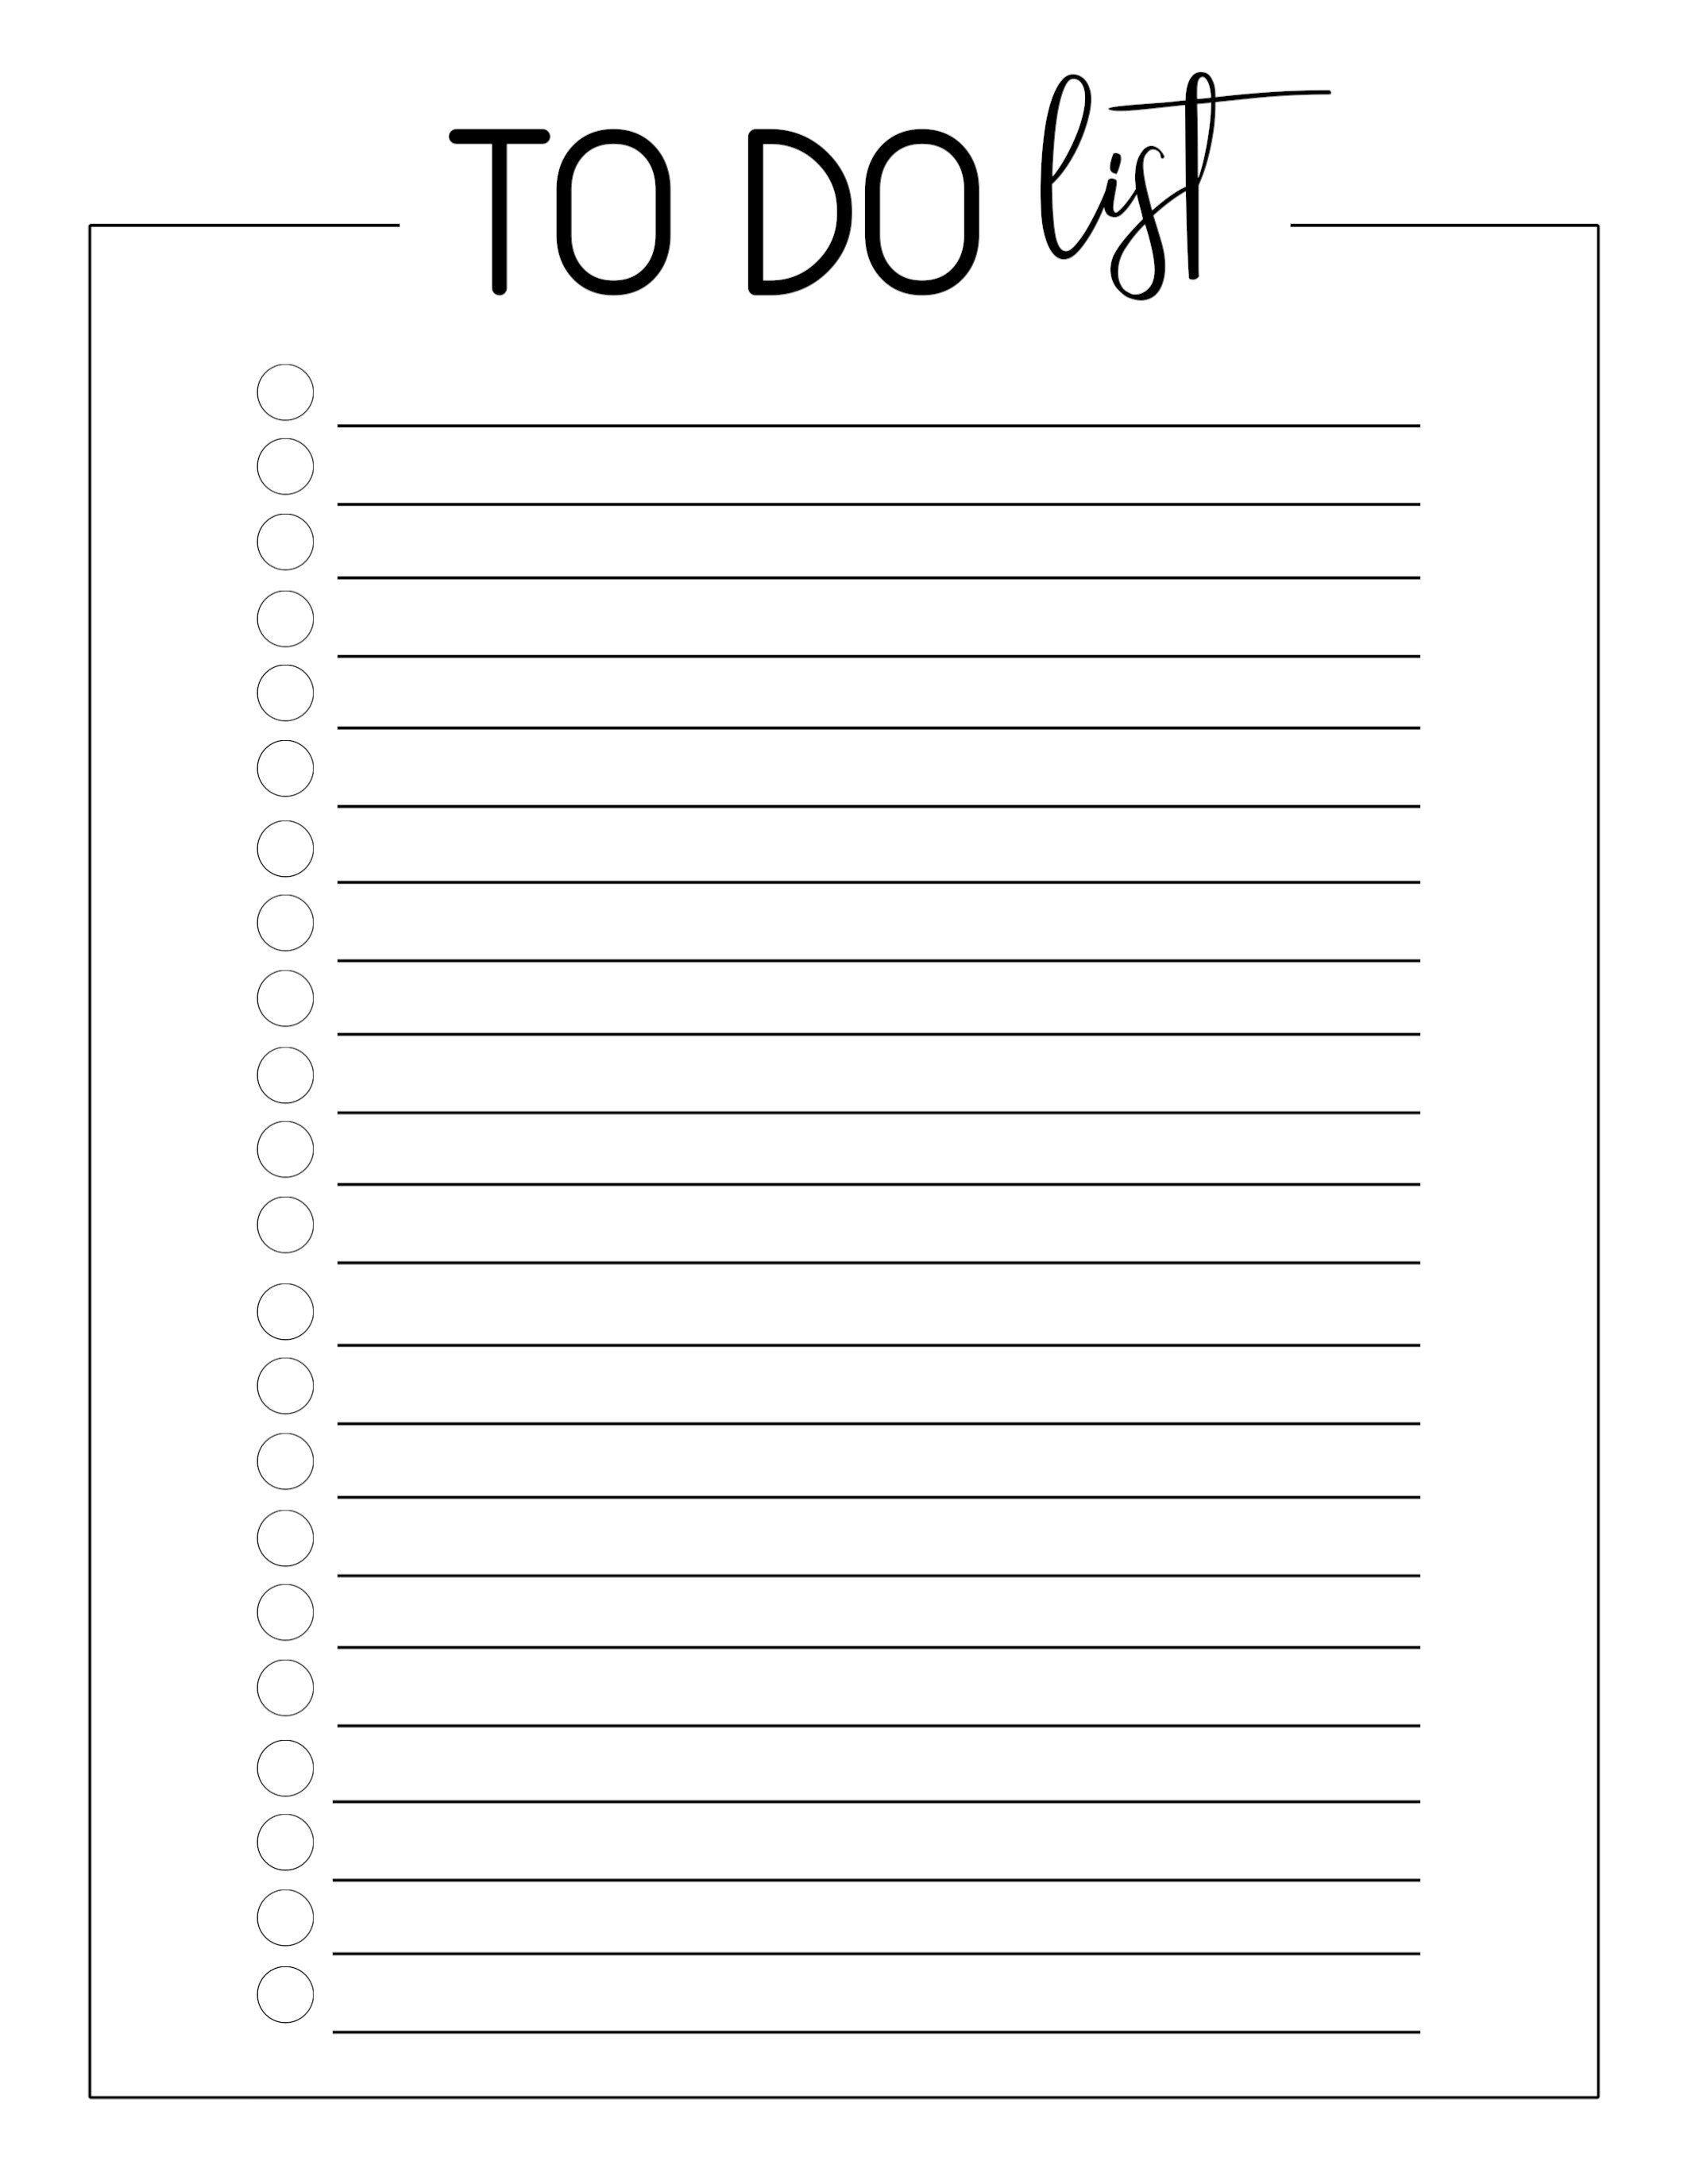 Free Printable To Do Checklist Template - Paper Trail Design - Free Printable List